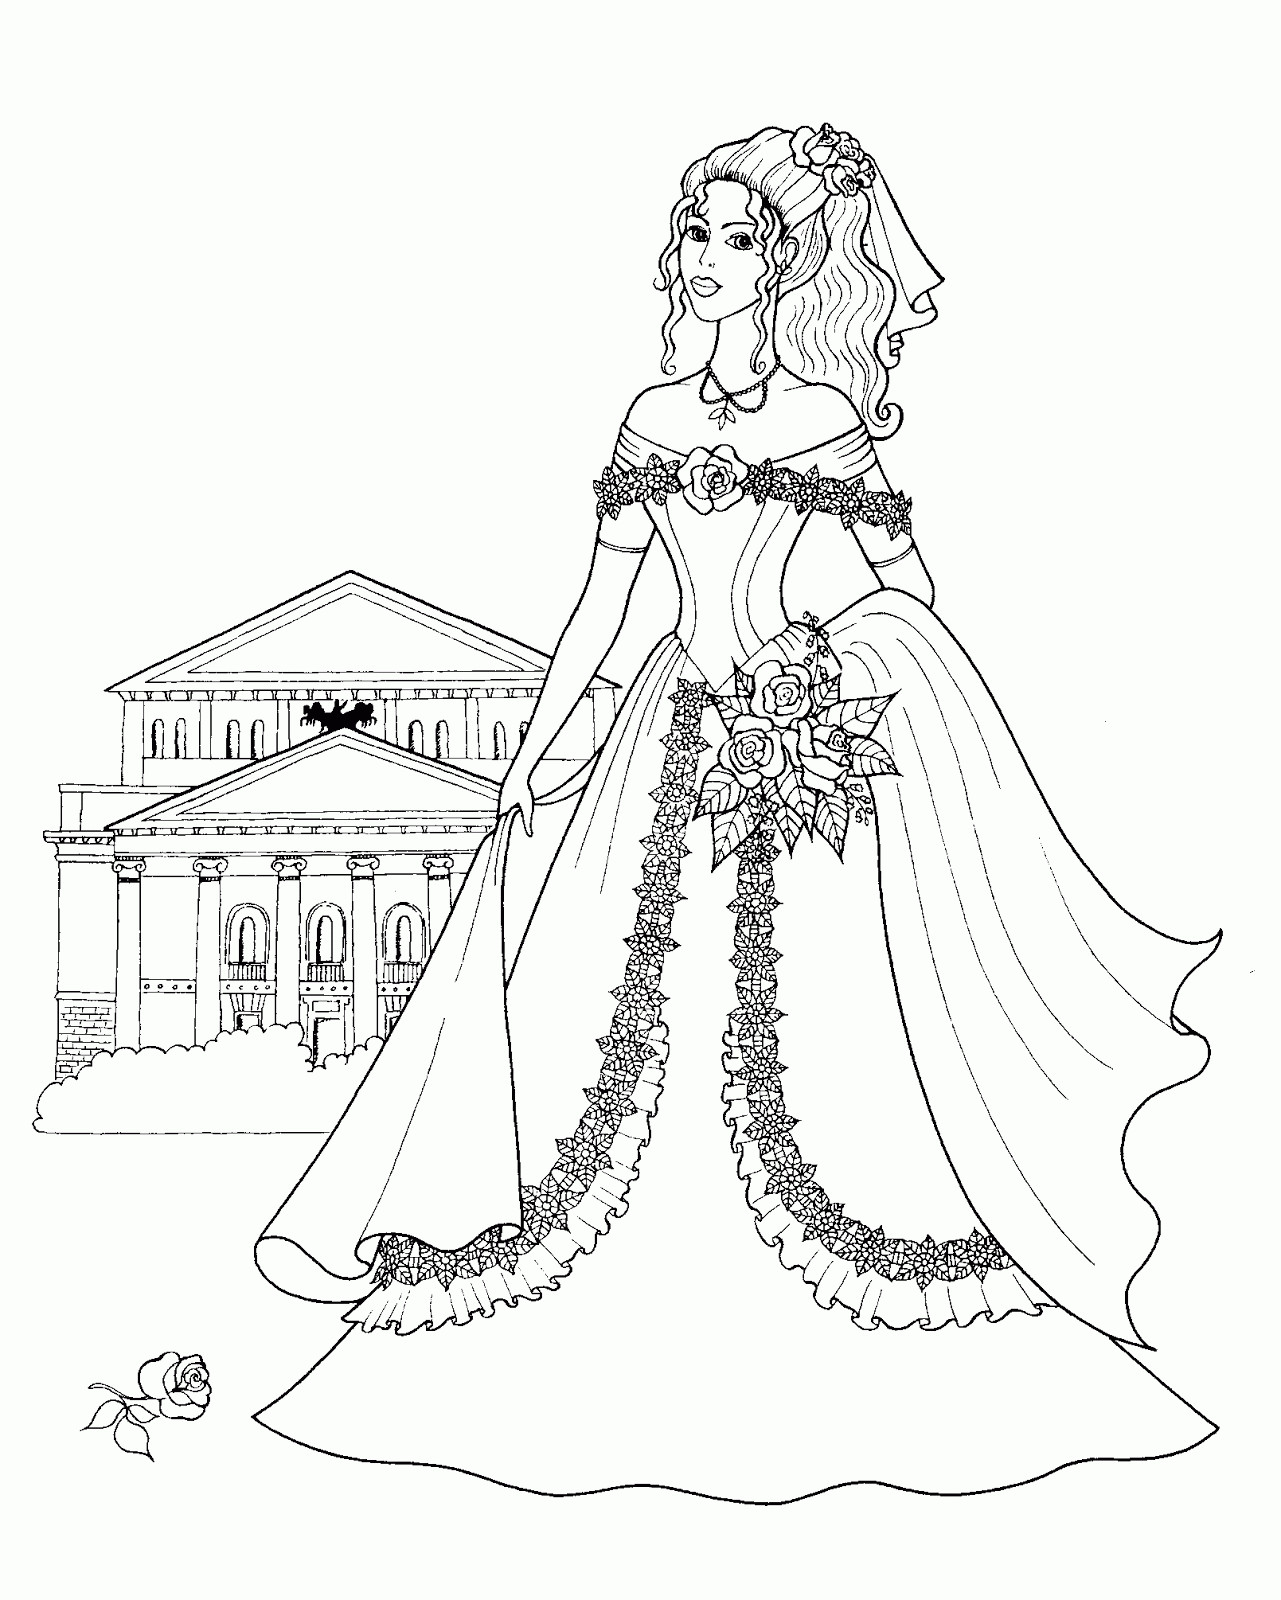 Online Coloring Pages Girls
 Coloring Pages Fashionable Girls free printable coloring